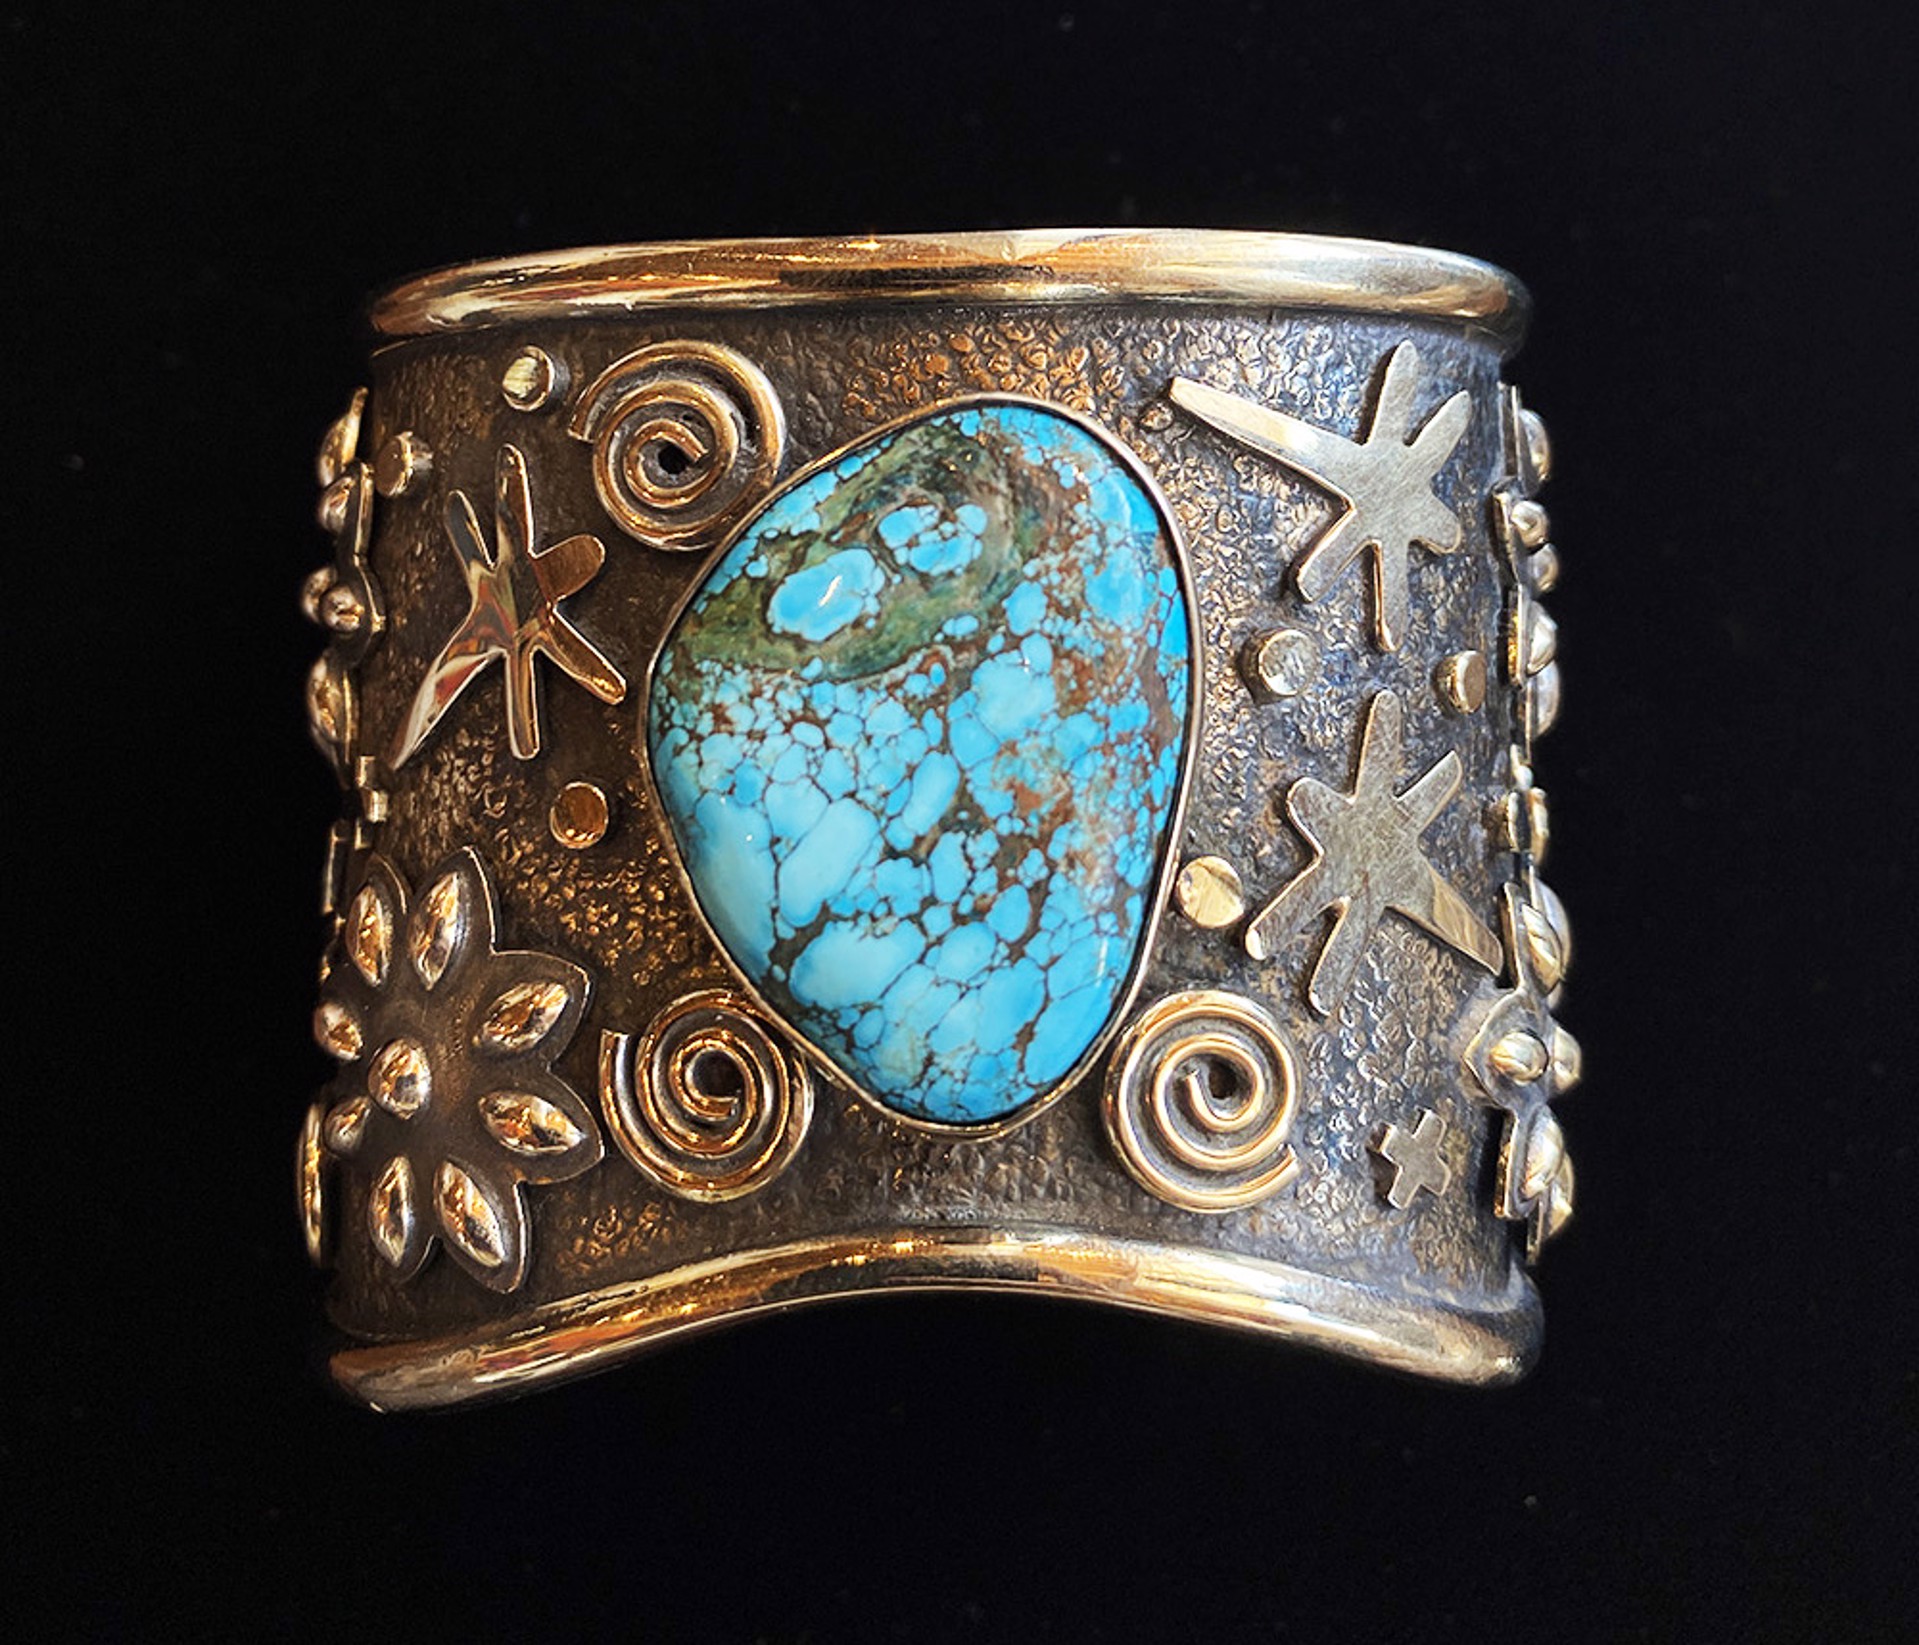 Turquoise Cuff with Dragonfly design by Artist Unknown